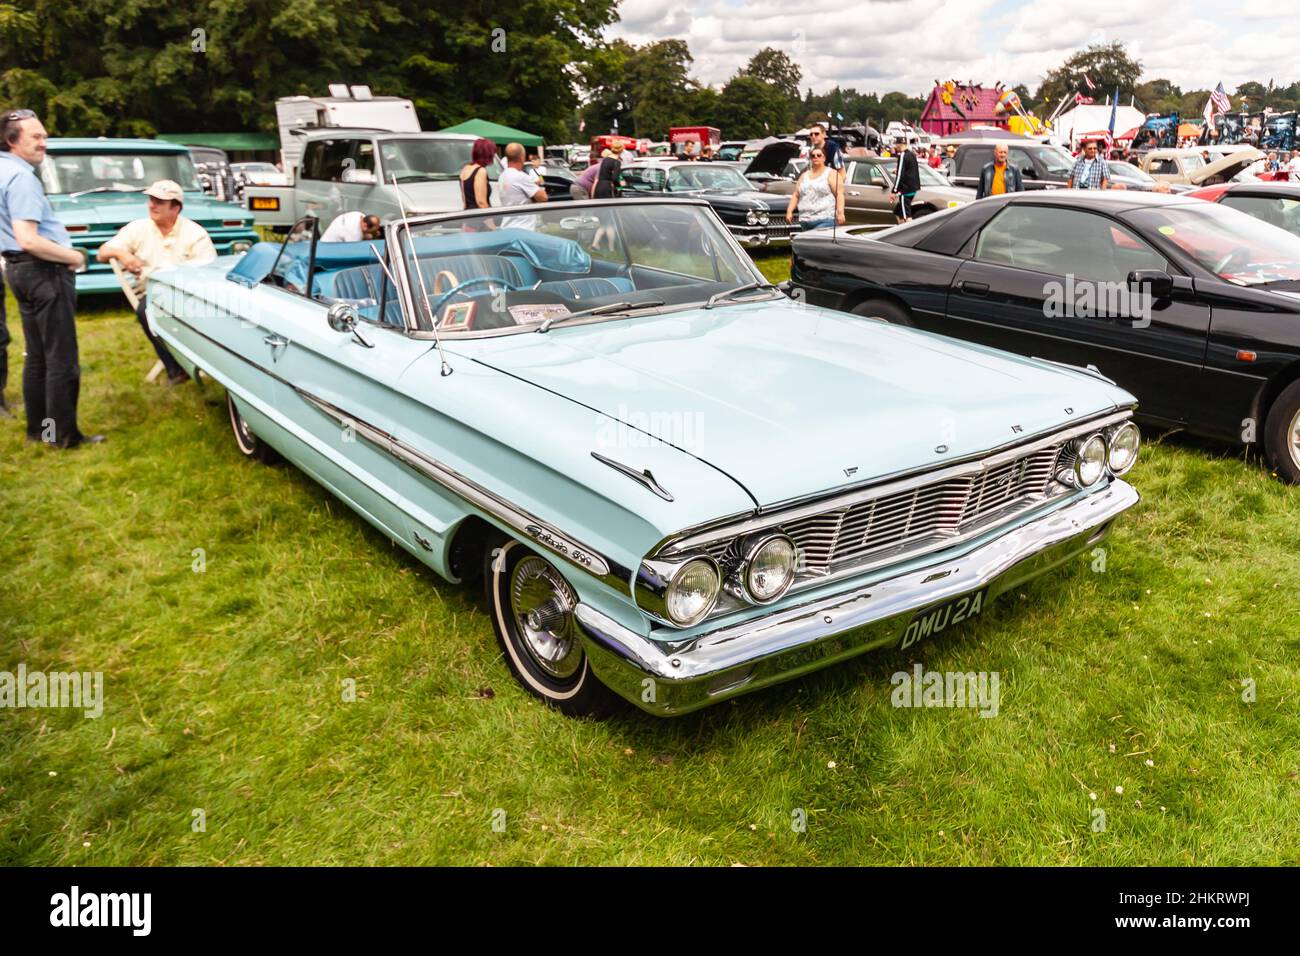 1964 vintage Ford Galaxie 500 Convertible at American classic car show Stock Photo